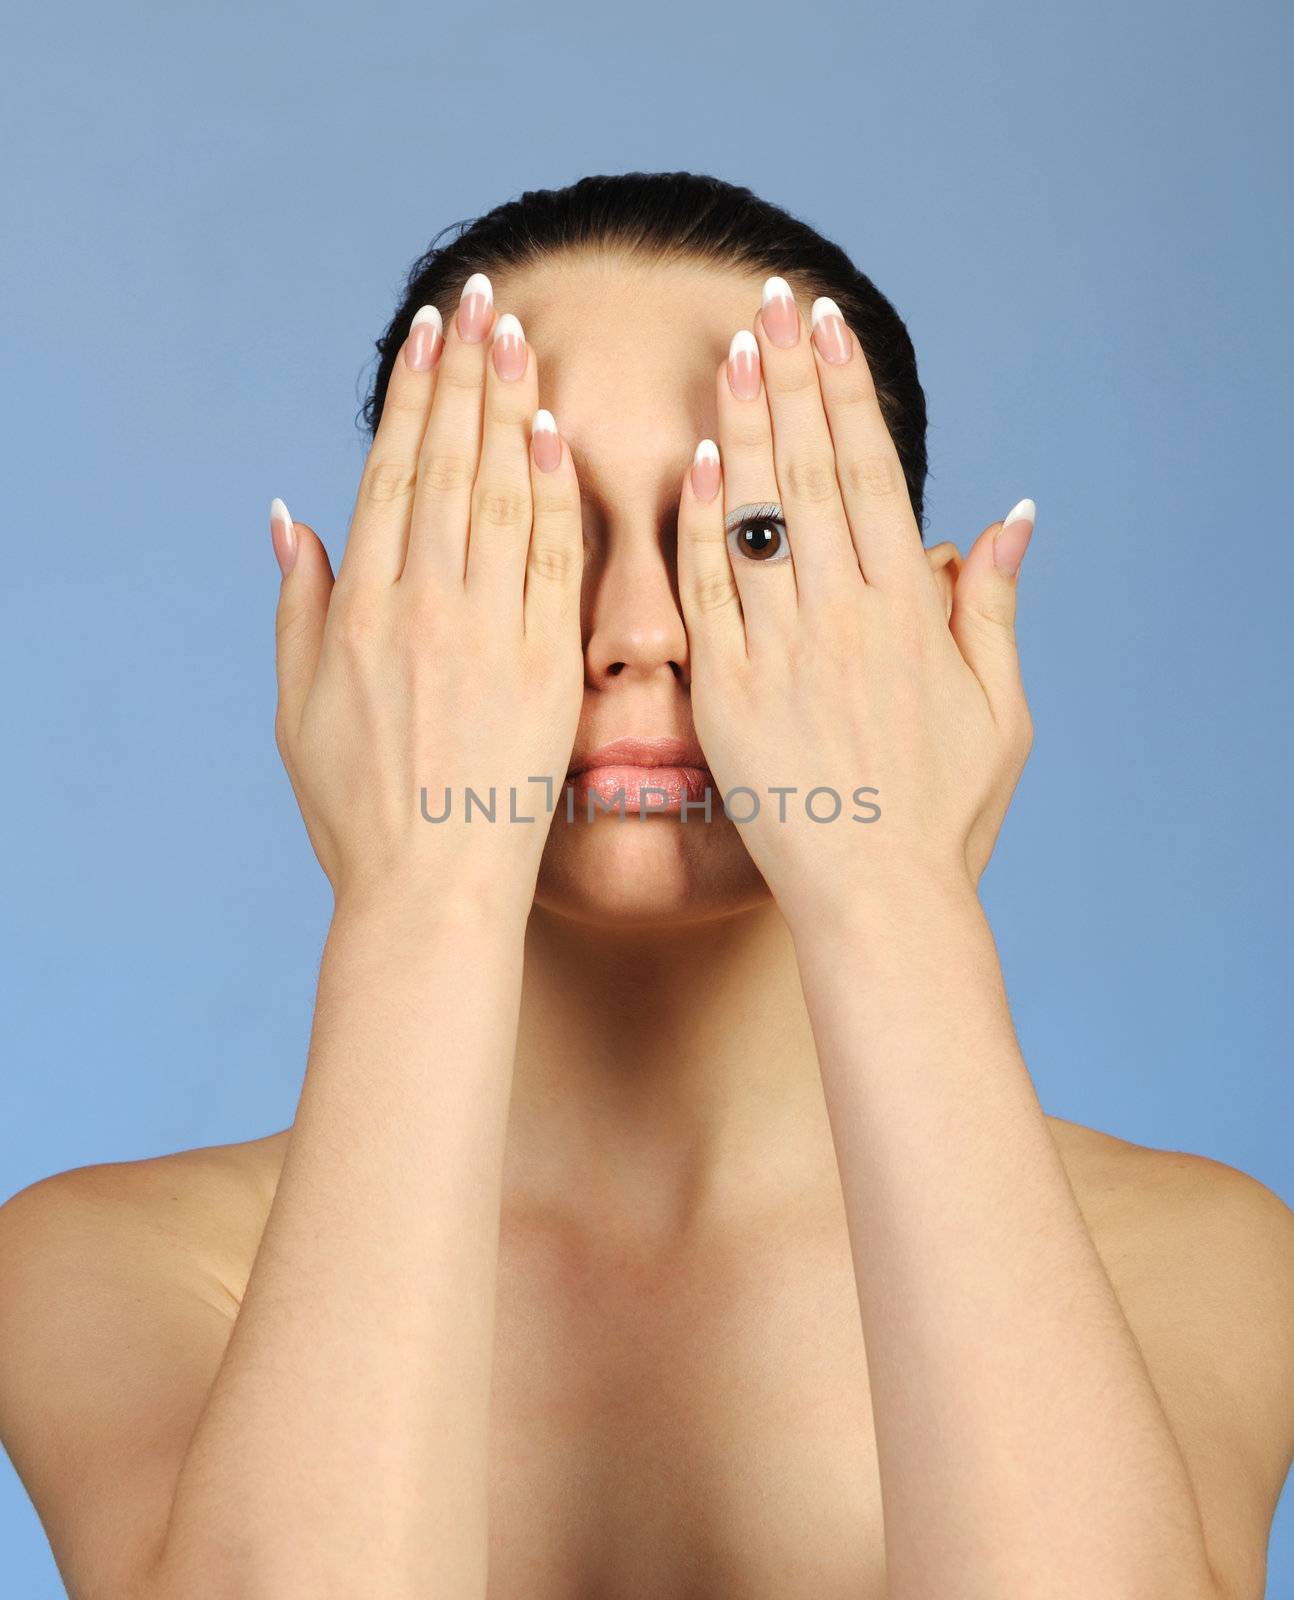 The abstract image of the girl look through fingers. A blue background